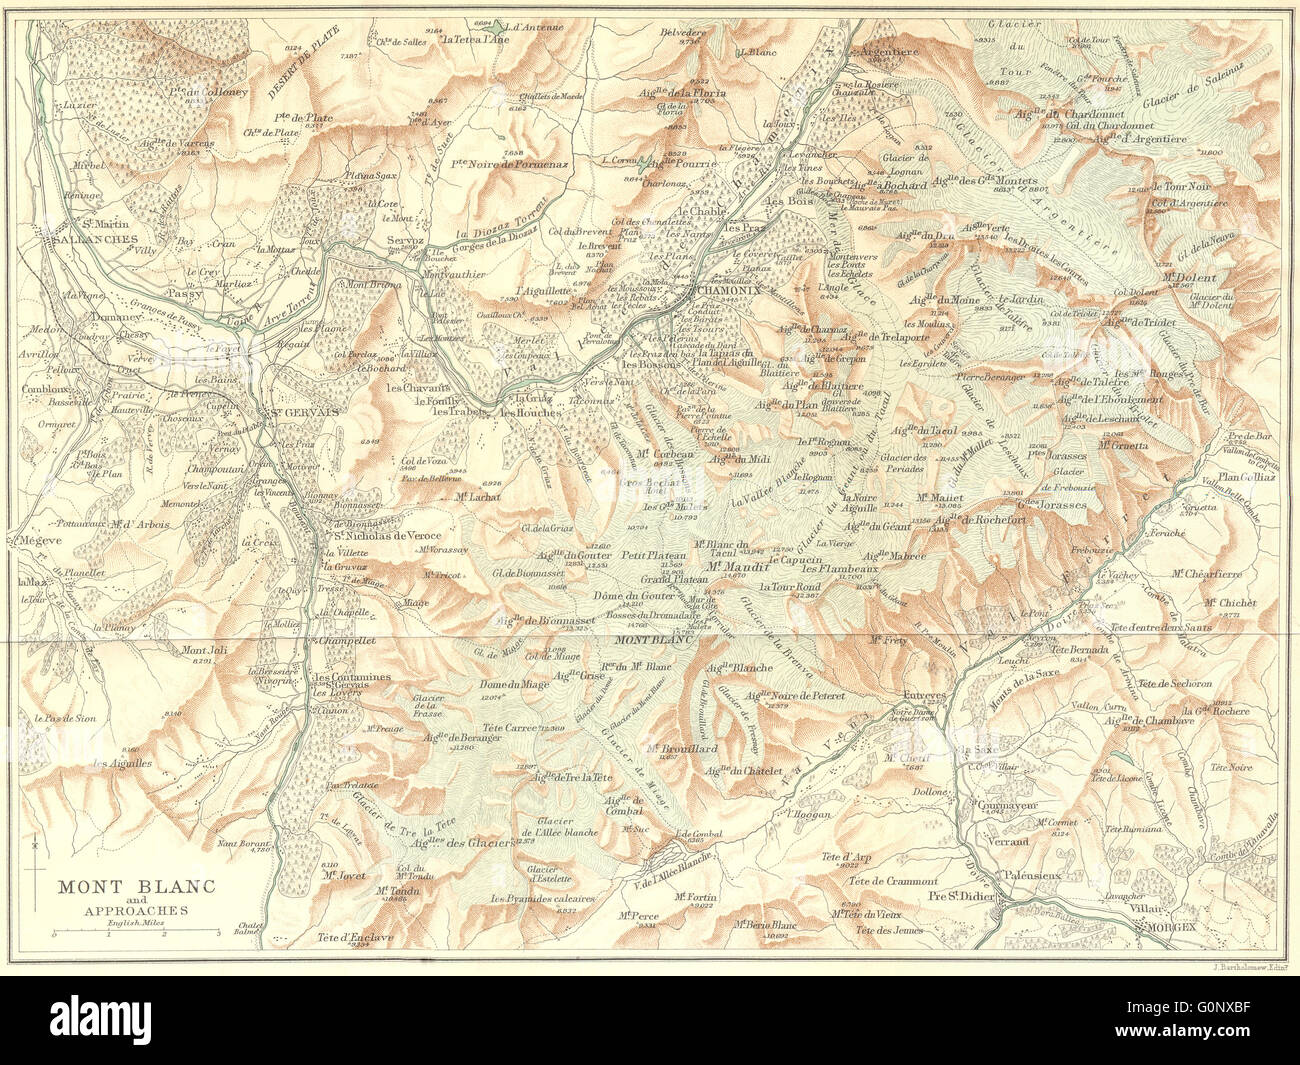 FRANCE: Mont Blanc & Approaches, 1899 antique map Stock Photo